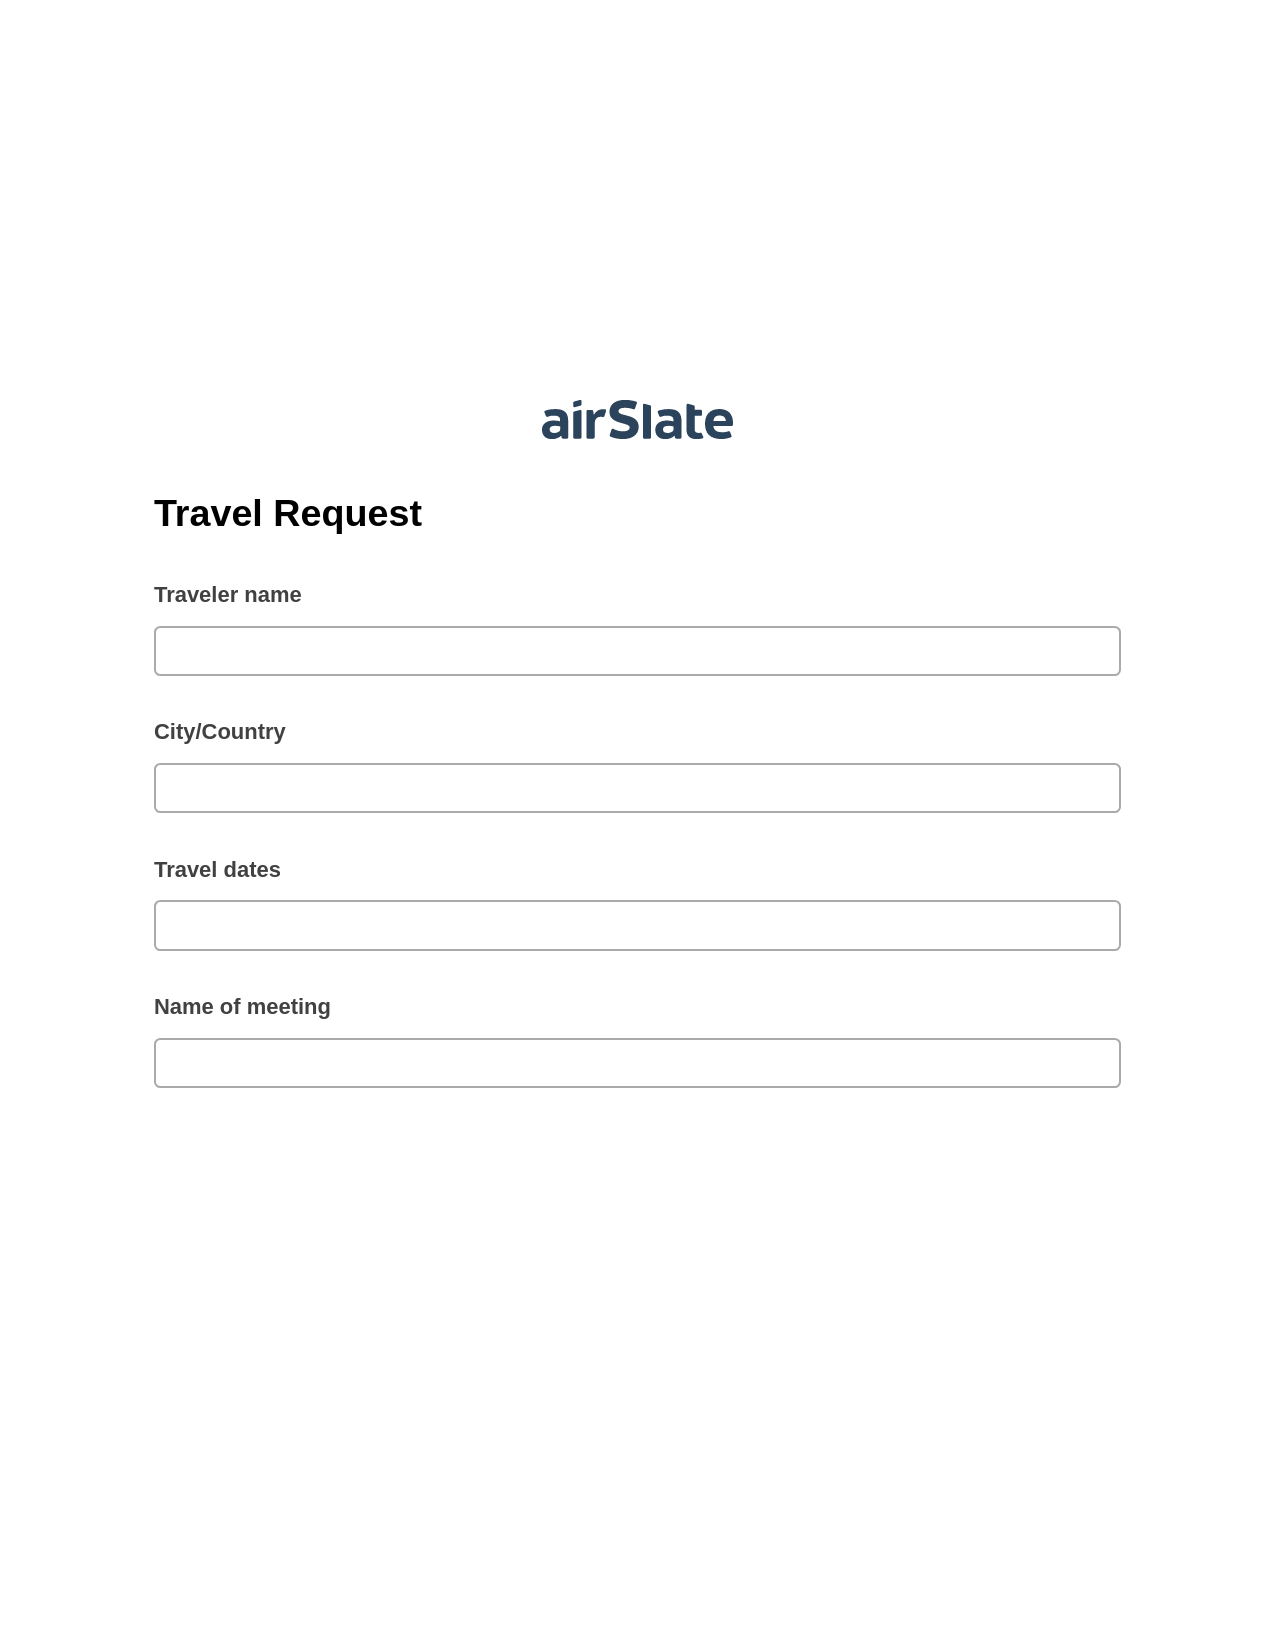 Travel Request Pre-fill Dropdowns from MySQL Bot, Create Slate Reminder Bot, Archive to SharePoint Folder Bot